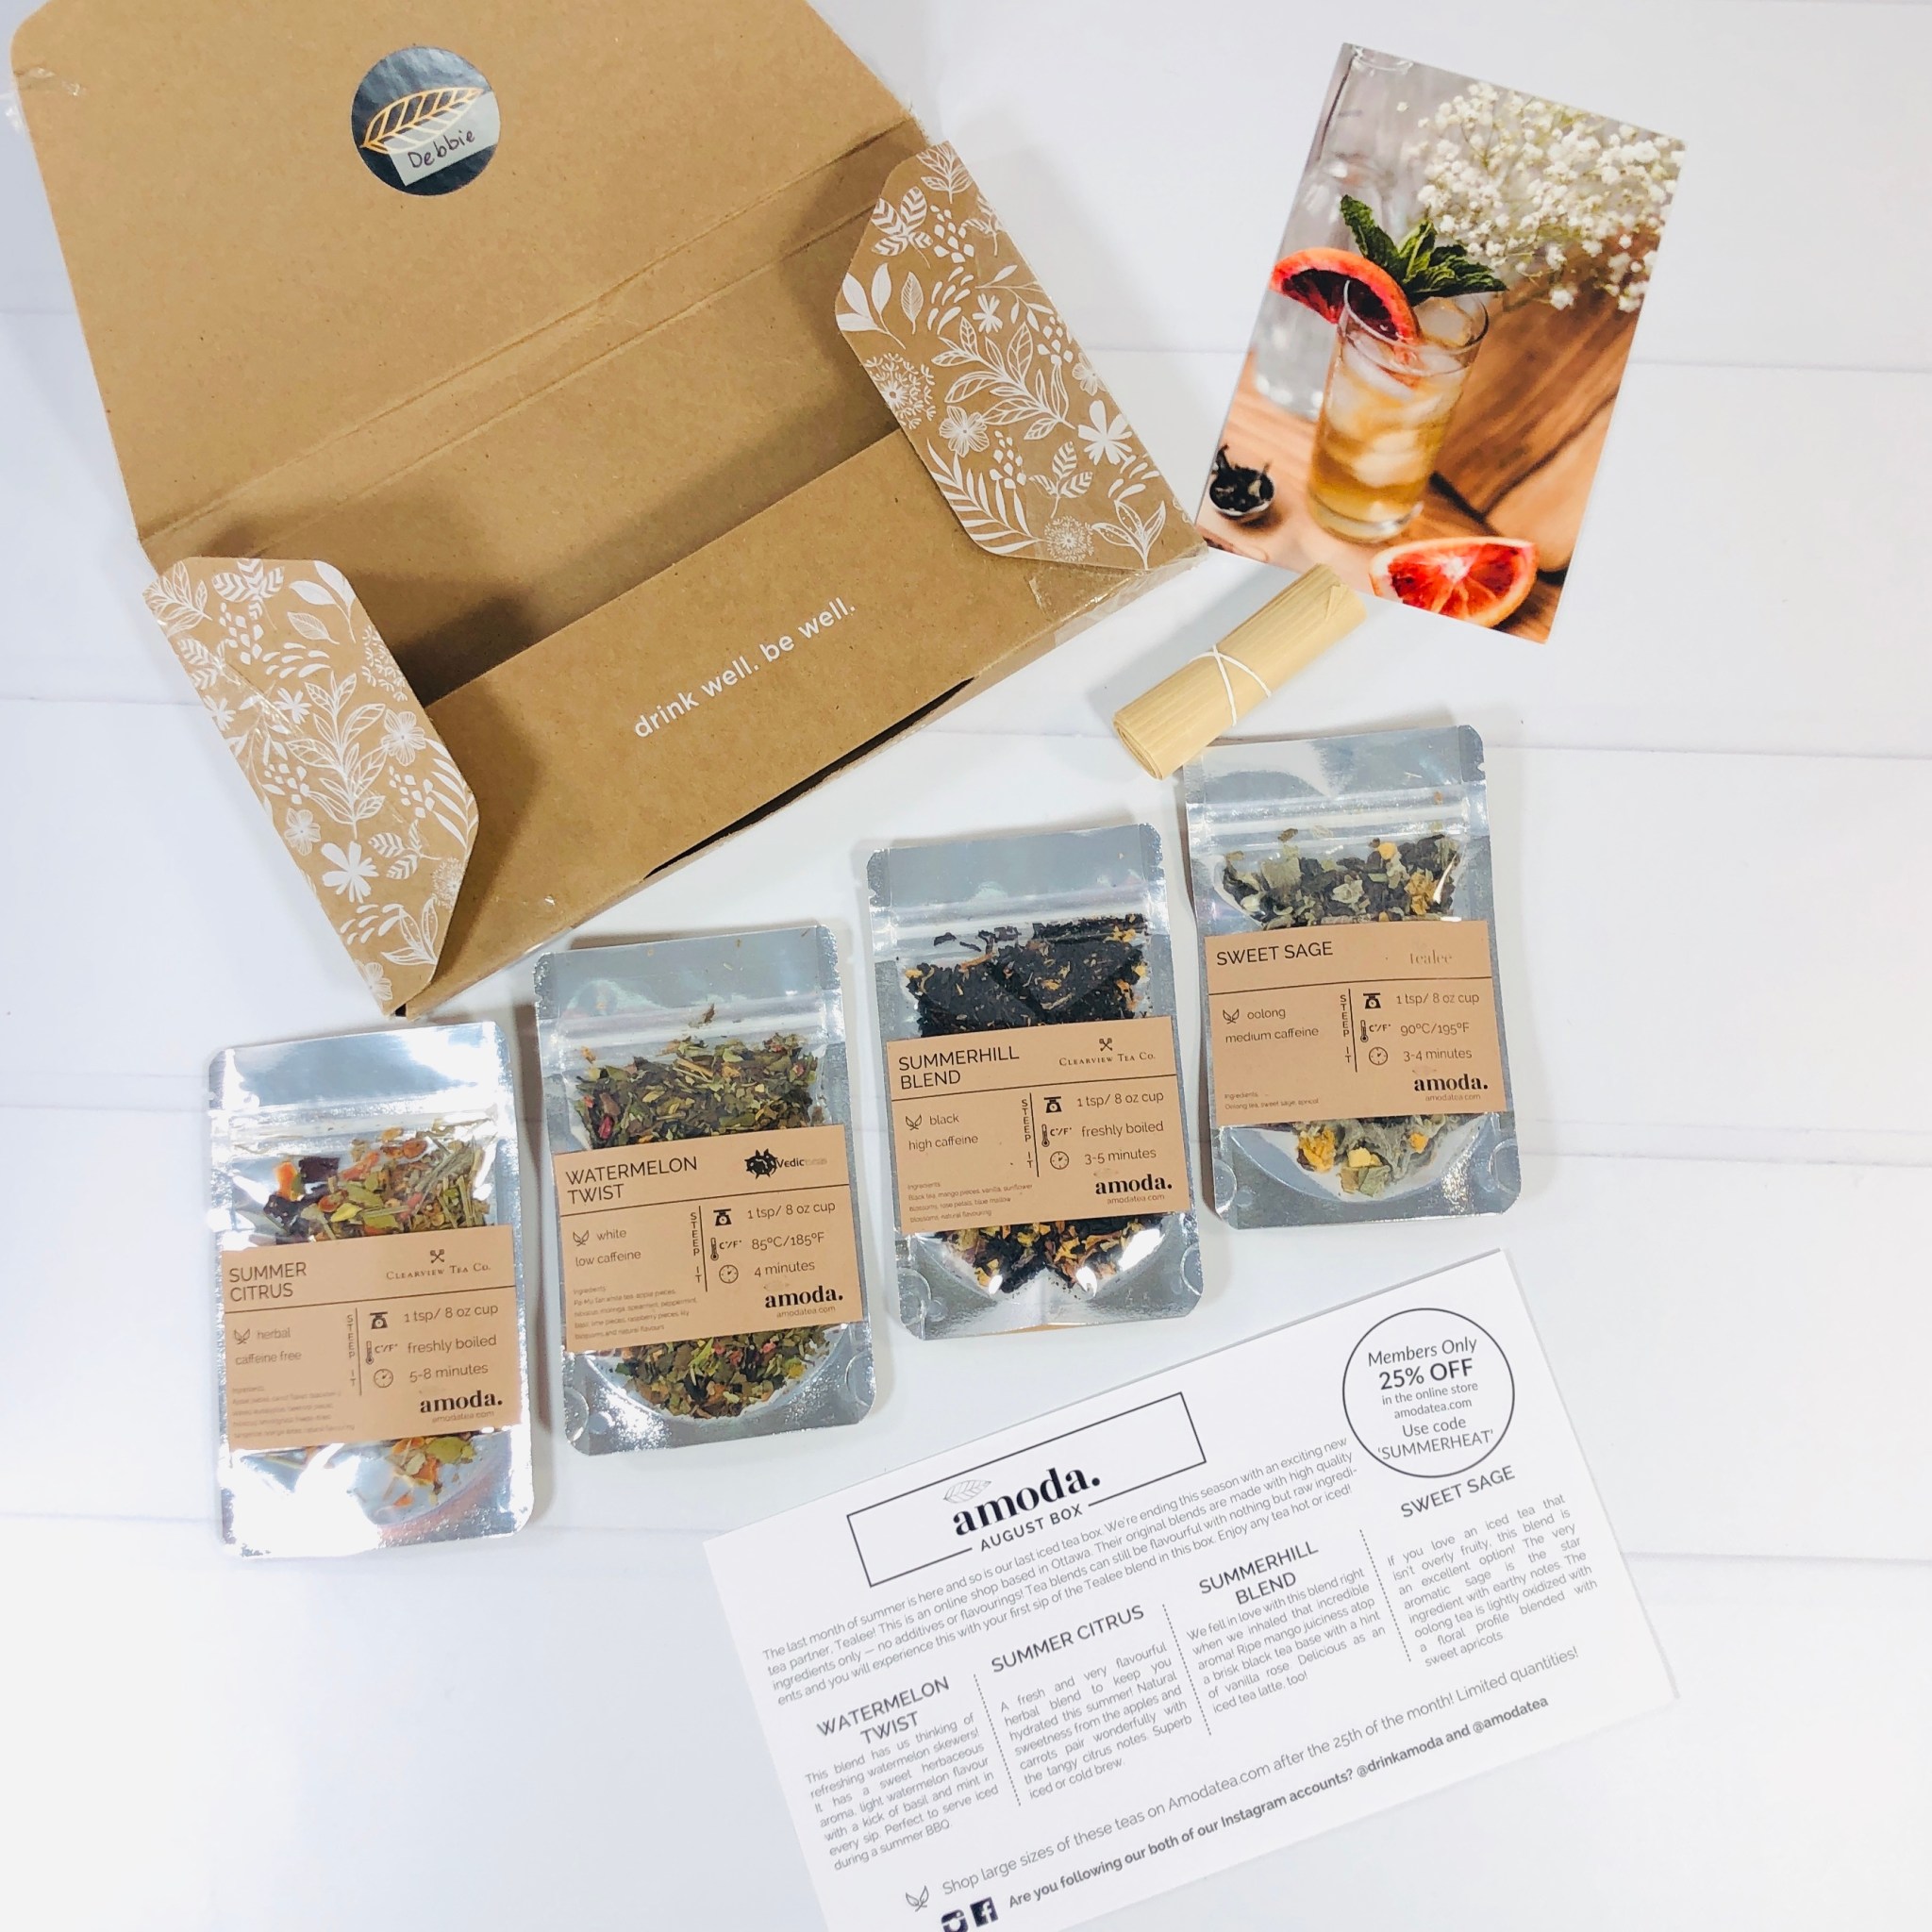 Amoda Tea Reviews: Get All The Details At Hello Subscription!